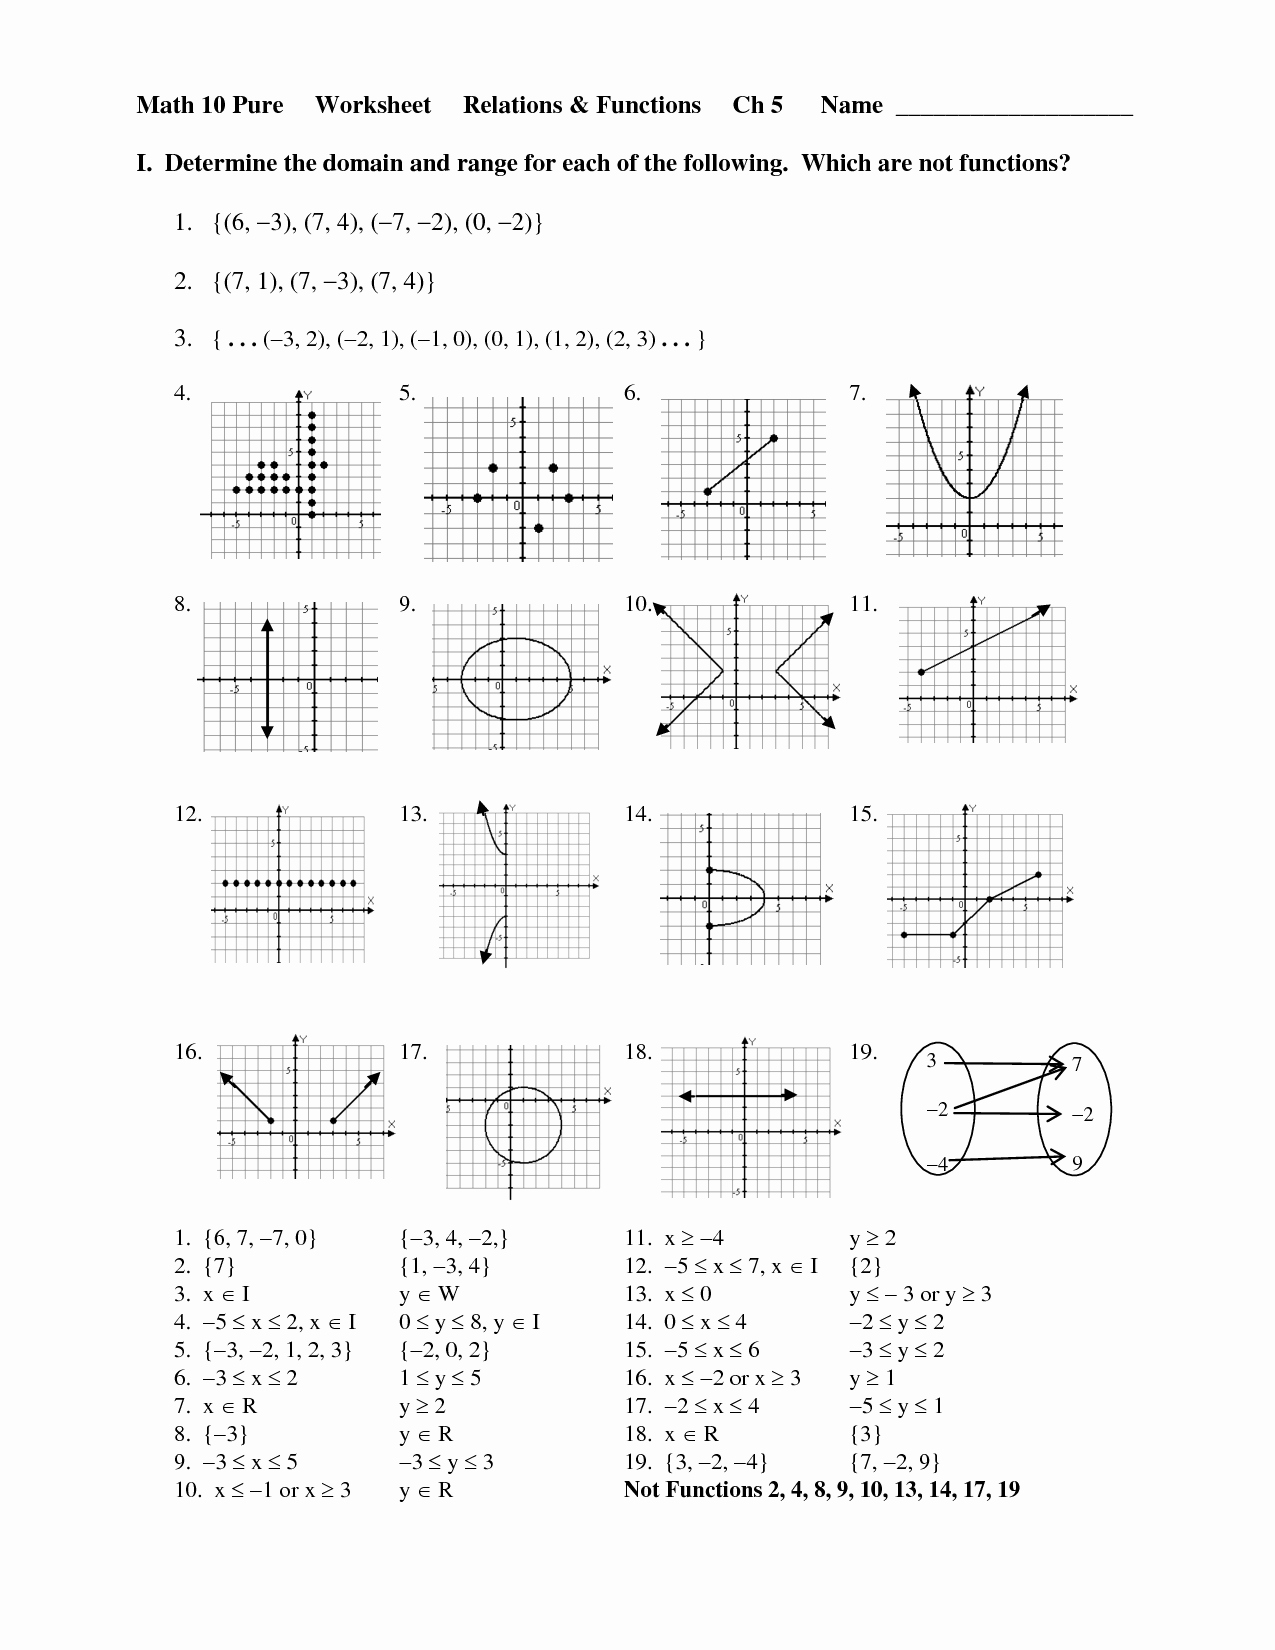 Domain and Range From Graphs Worksheet Awesome 12 Best Of Function Notation Algebra Worksheets